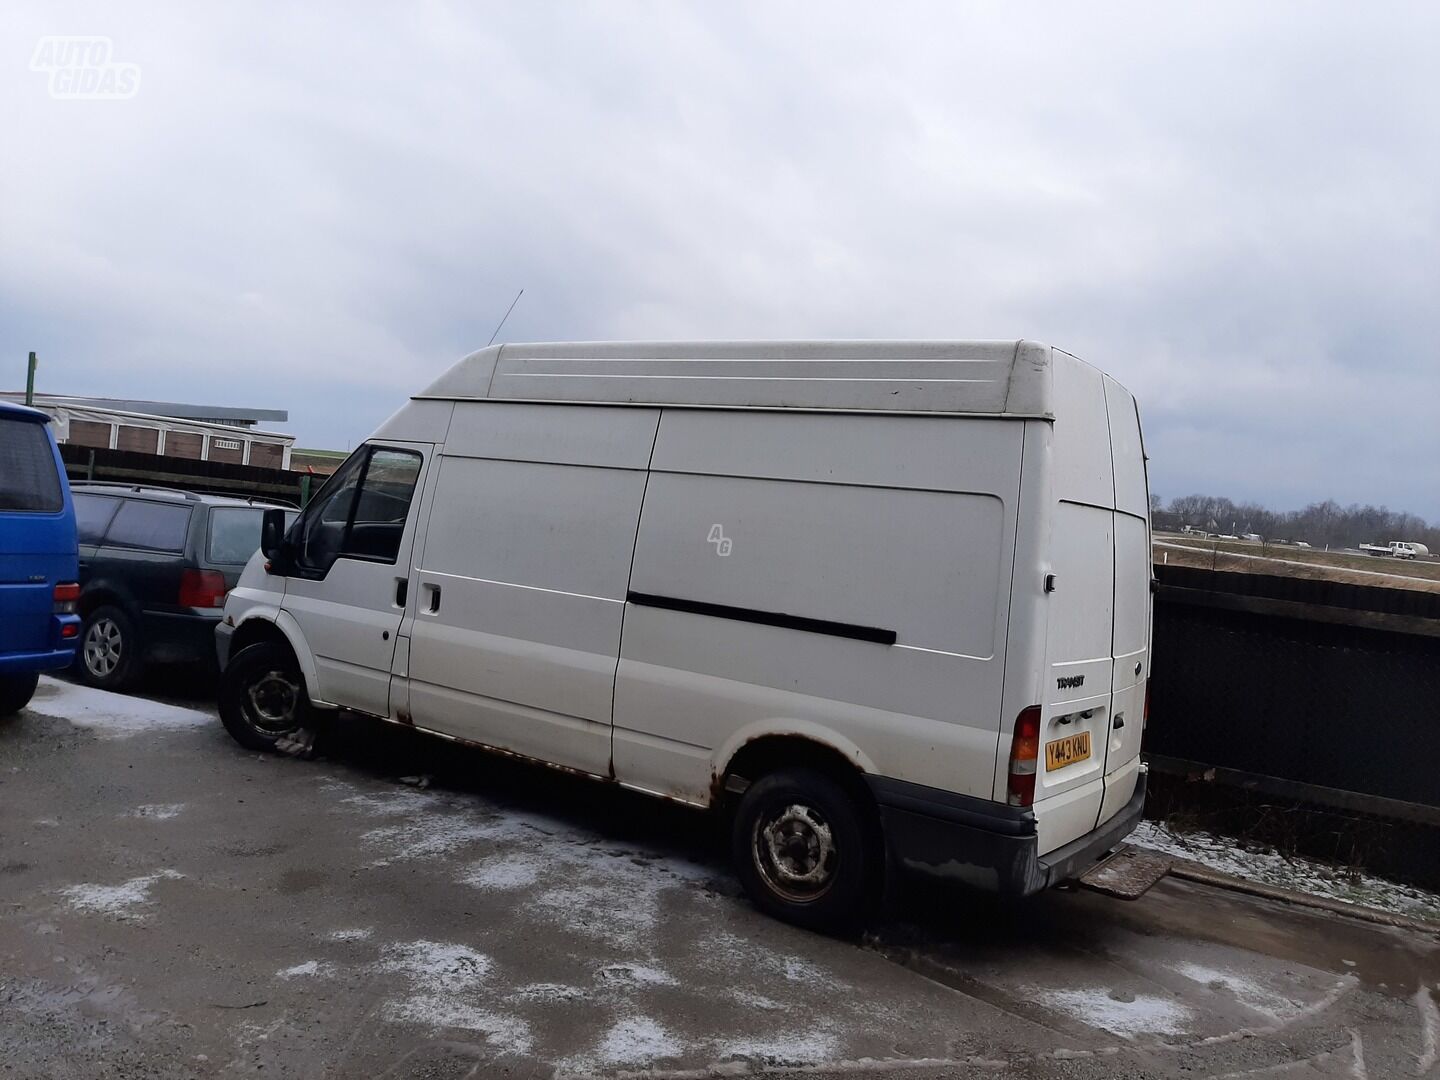 Ford Transit 2002 y parts